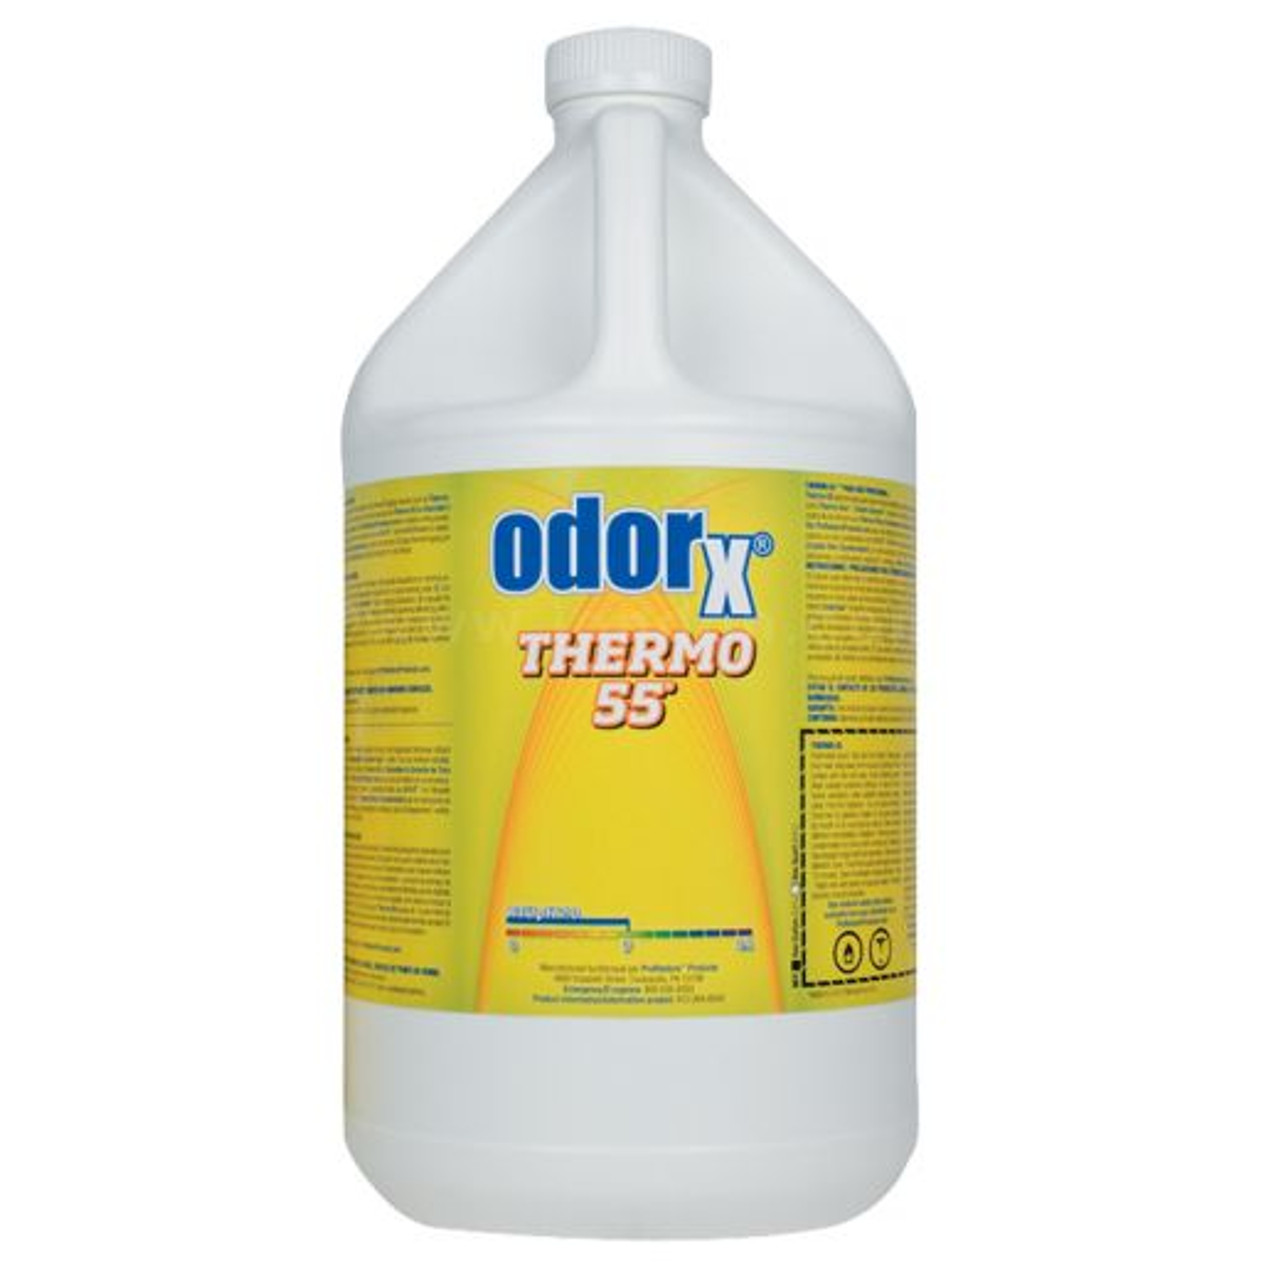 ODORX Thermo 55 Cherry CASE of 4 gal.